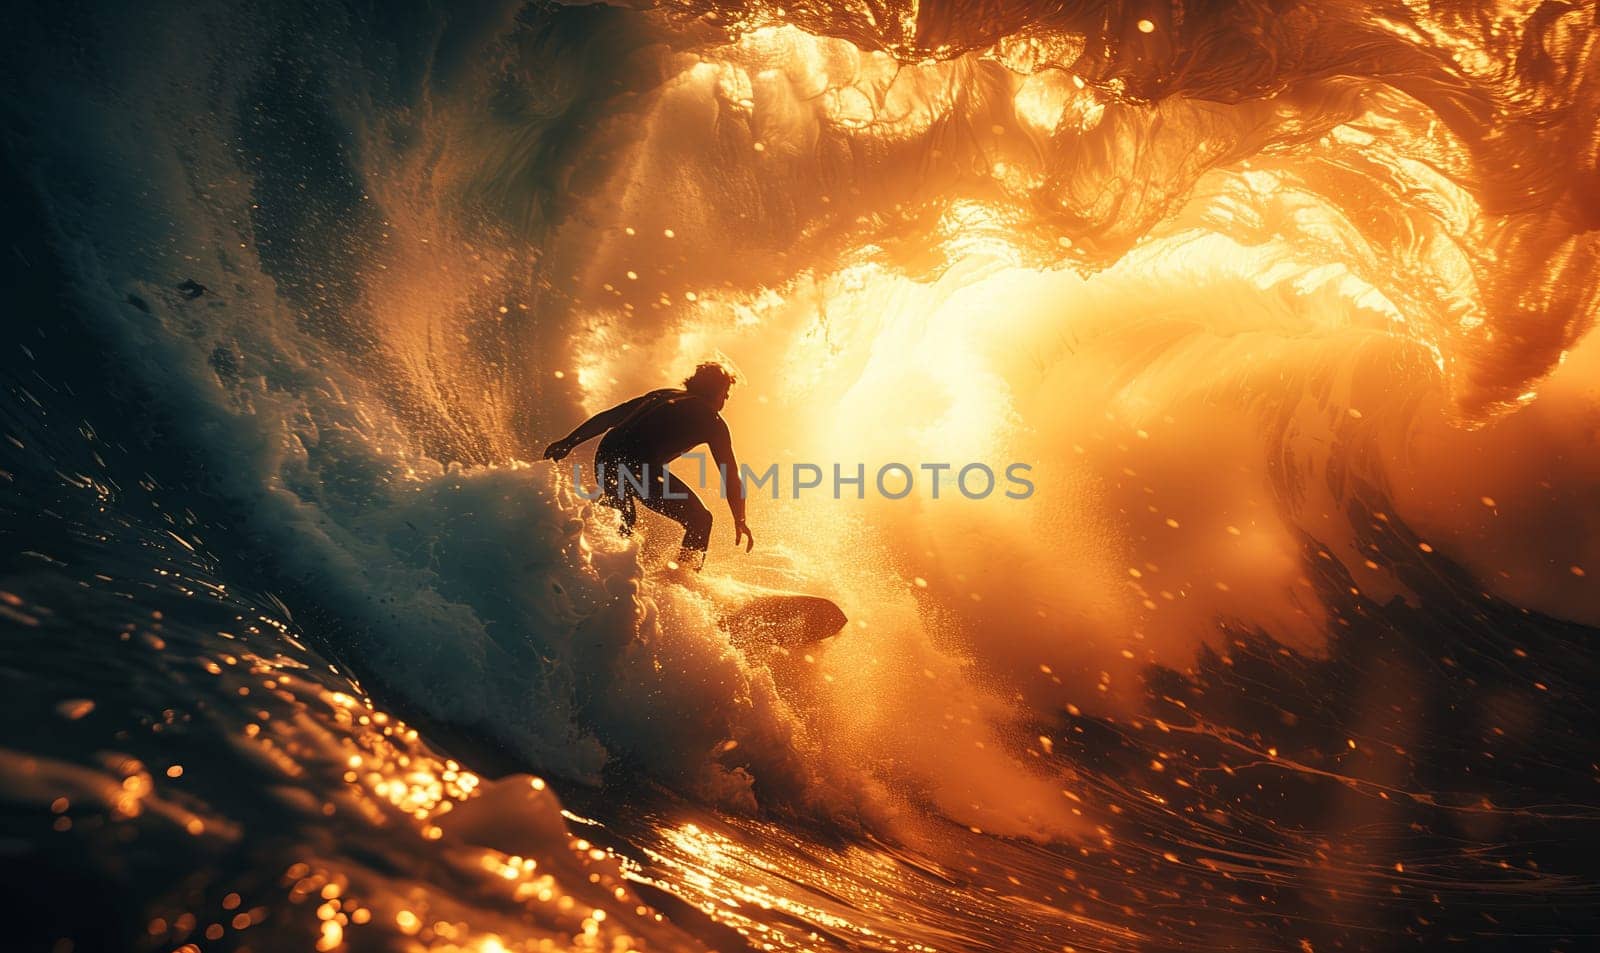 Man surfing wave in ocean, surrounded by water and atmosphere by richwolf